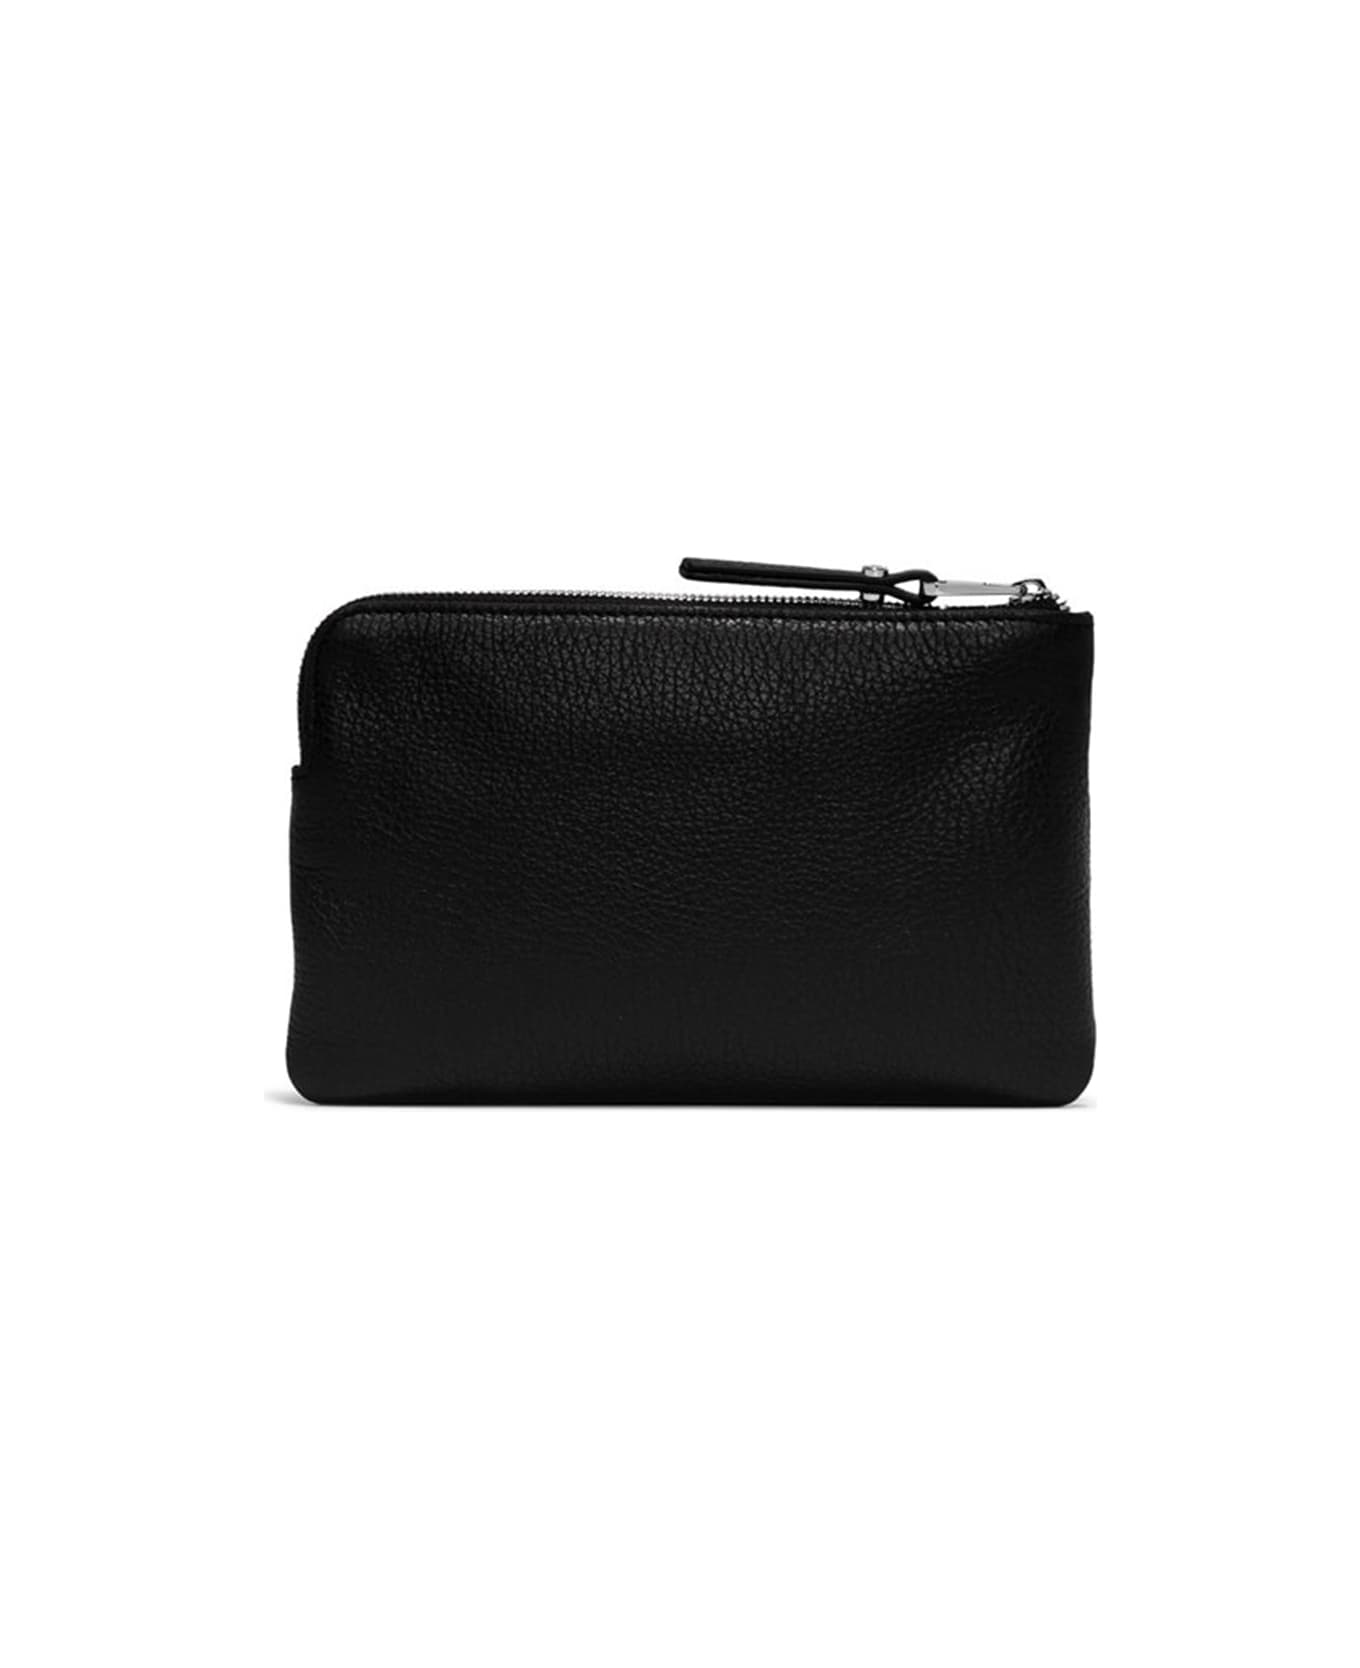 Gianni Chiarini Wallets Dollaro Wallet In Hammered Leather - NERO